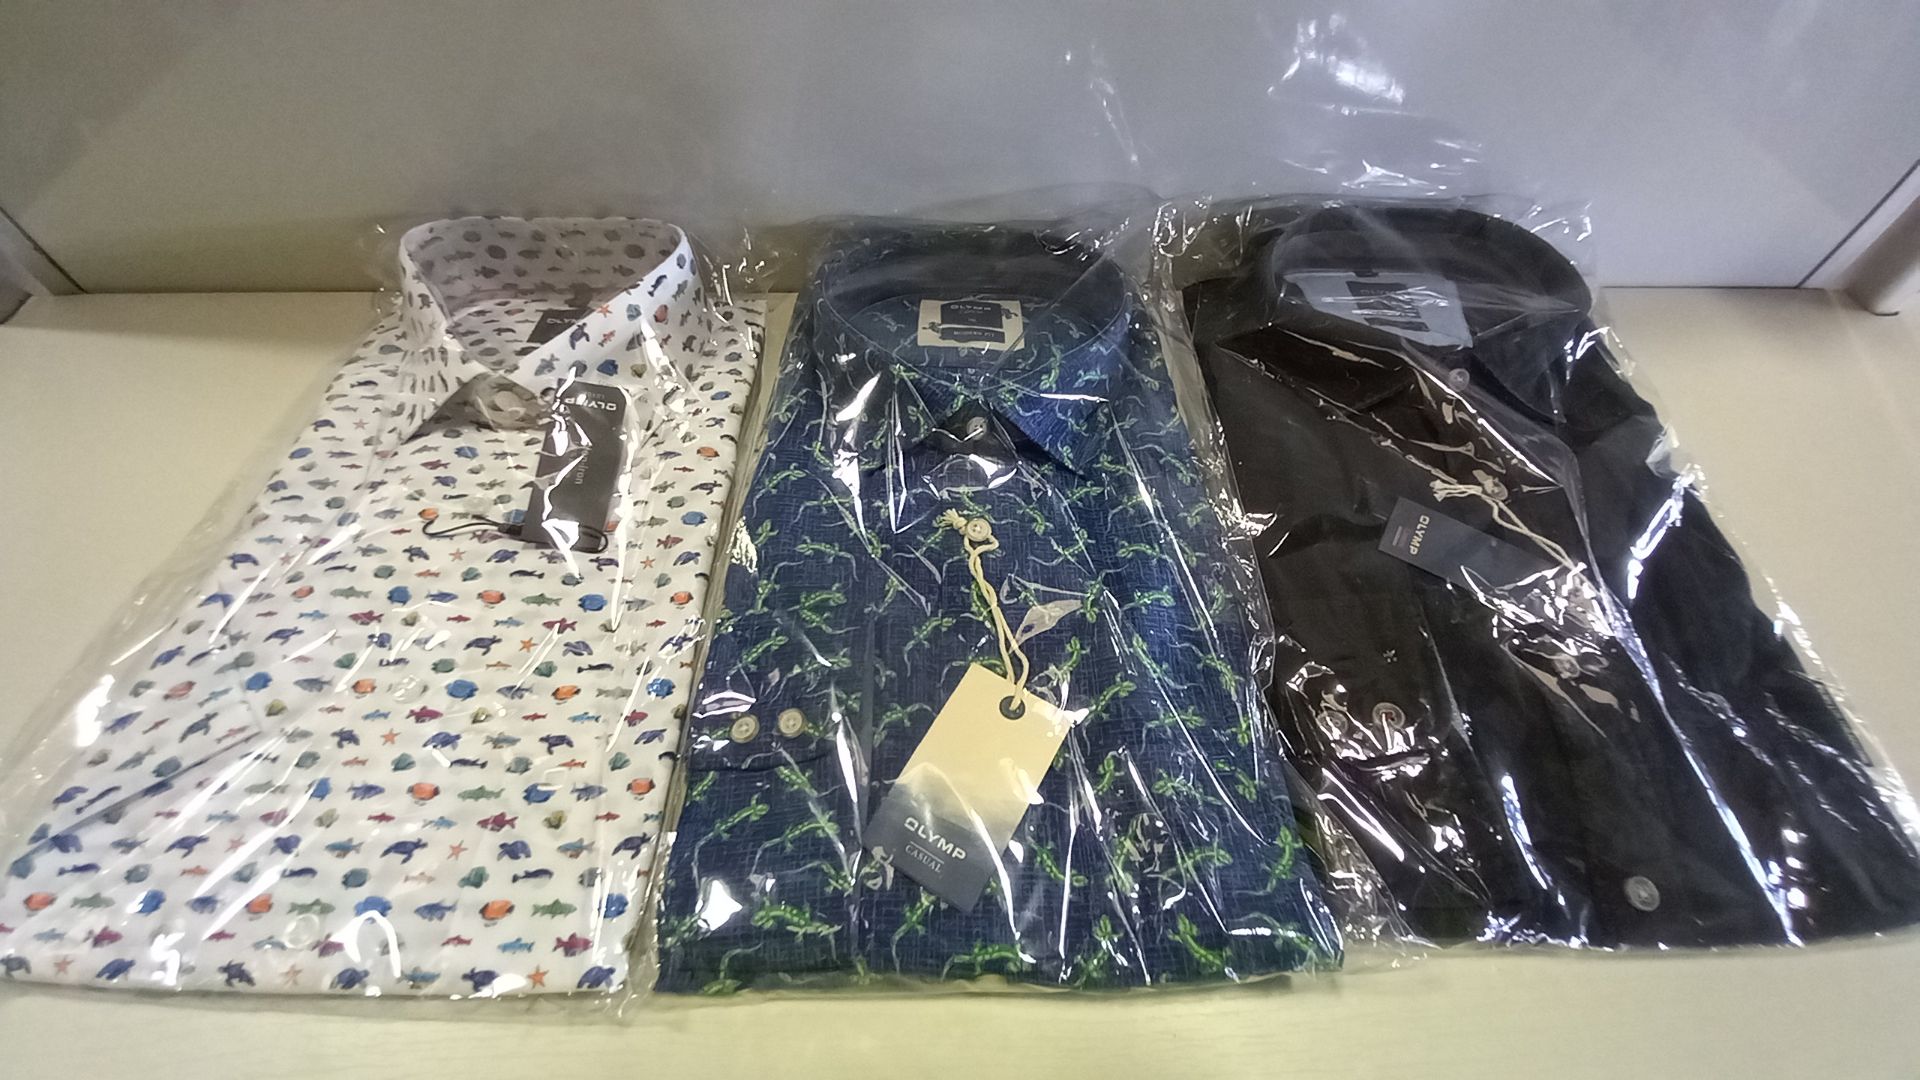 20 X BRAND NEW MENS DESIGNER BUTTON SHIRTS IN VARIOUS STYLES AND SIZES I.E OLYMP